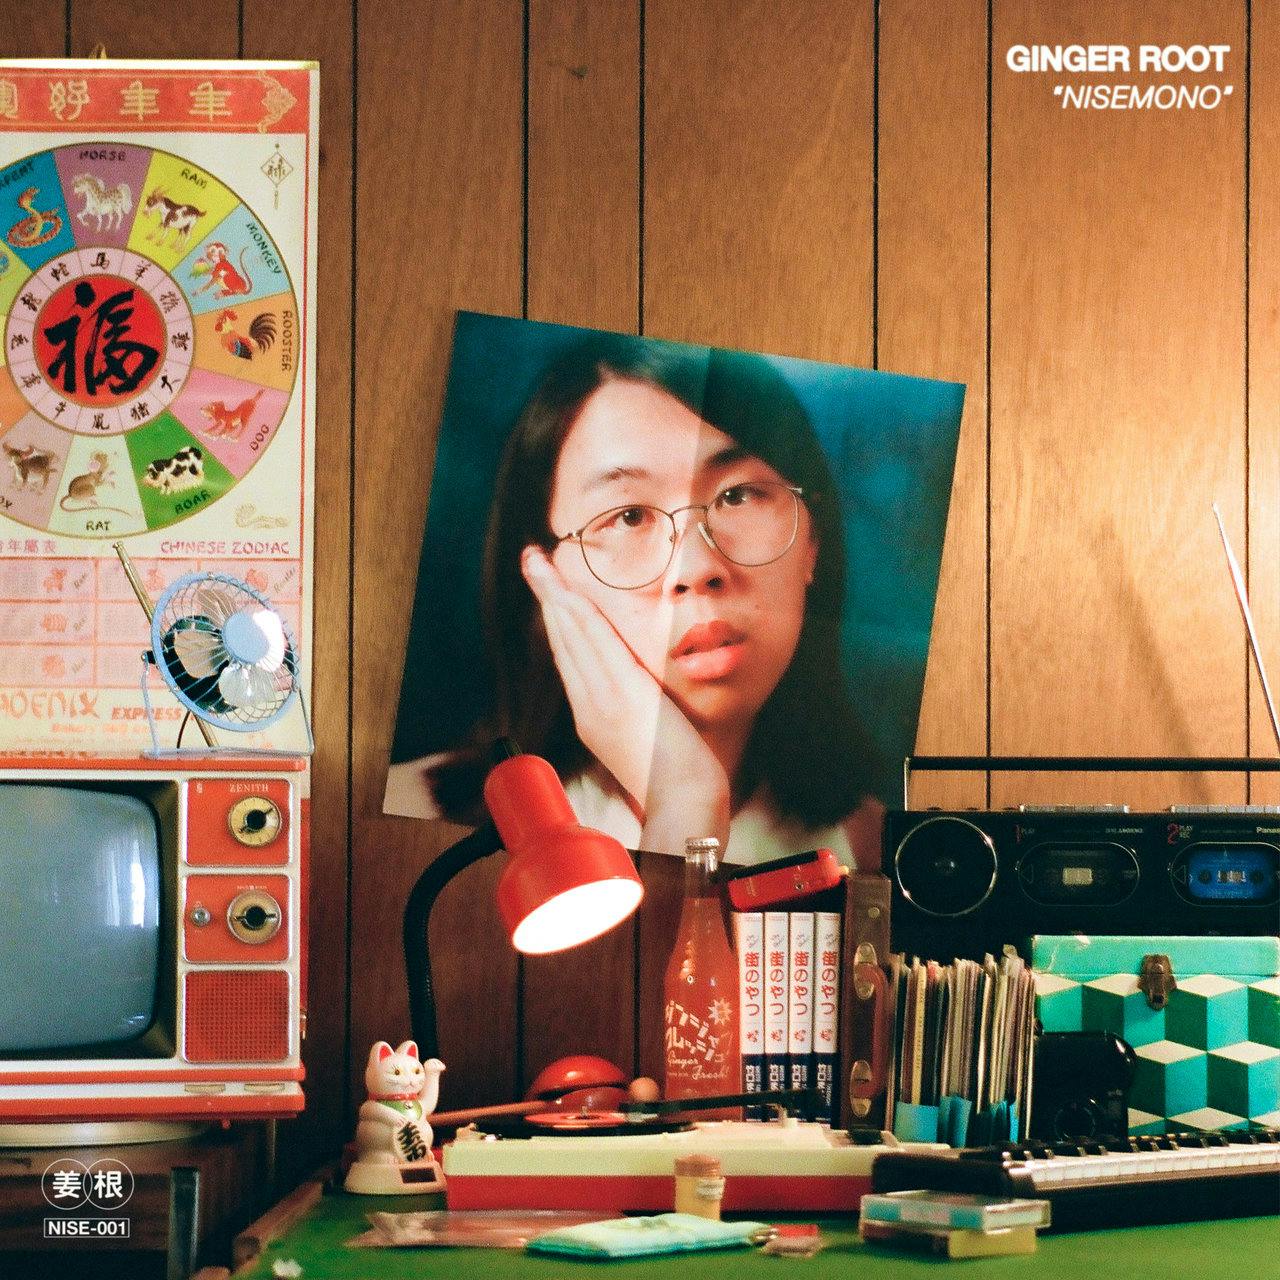 one of my favorite projects i've heard recently. My first introduction to Ginger Root was thru his song "Loretta" which played on the City Pop revival which Youtube spurred relatively recently. I'm a big City Pop fan and love artists like Tatsuro Yamashita, Masayoshi Takanaka and Anri. City Pop and Yacht Rock go pretty much hand in hand. What I particularly love about Ginger Root is how he constructs his own entire universe where after having to fill in for a pop singer, he becomes famous and starts his own pop career as a big star. He creates amazing music videos and gets even the smallest details right to where you can't help but be fully immersed in the world he creates. The music also has that City Pop flair to it and gets very funky at times. Favorites off this are Loneliness and the title track. 